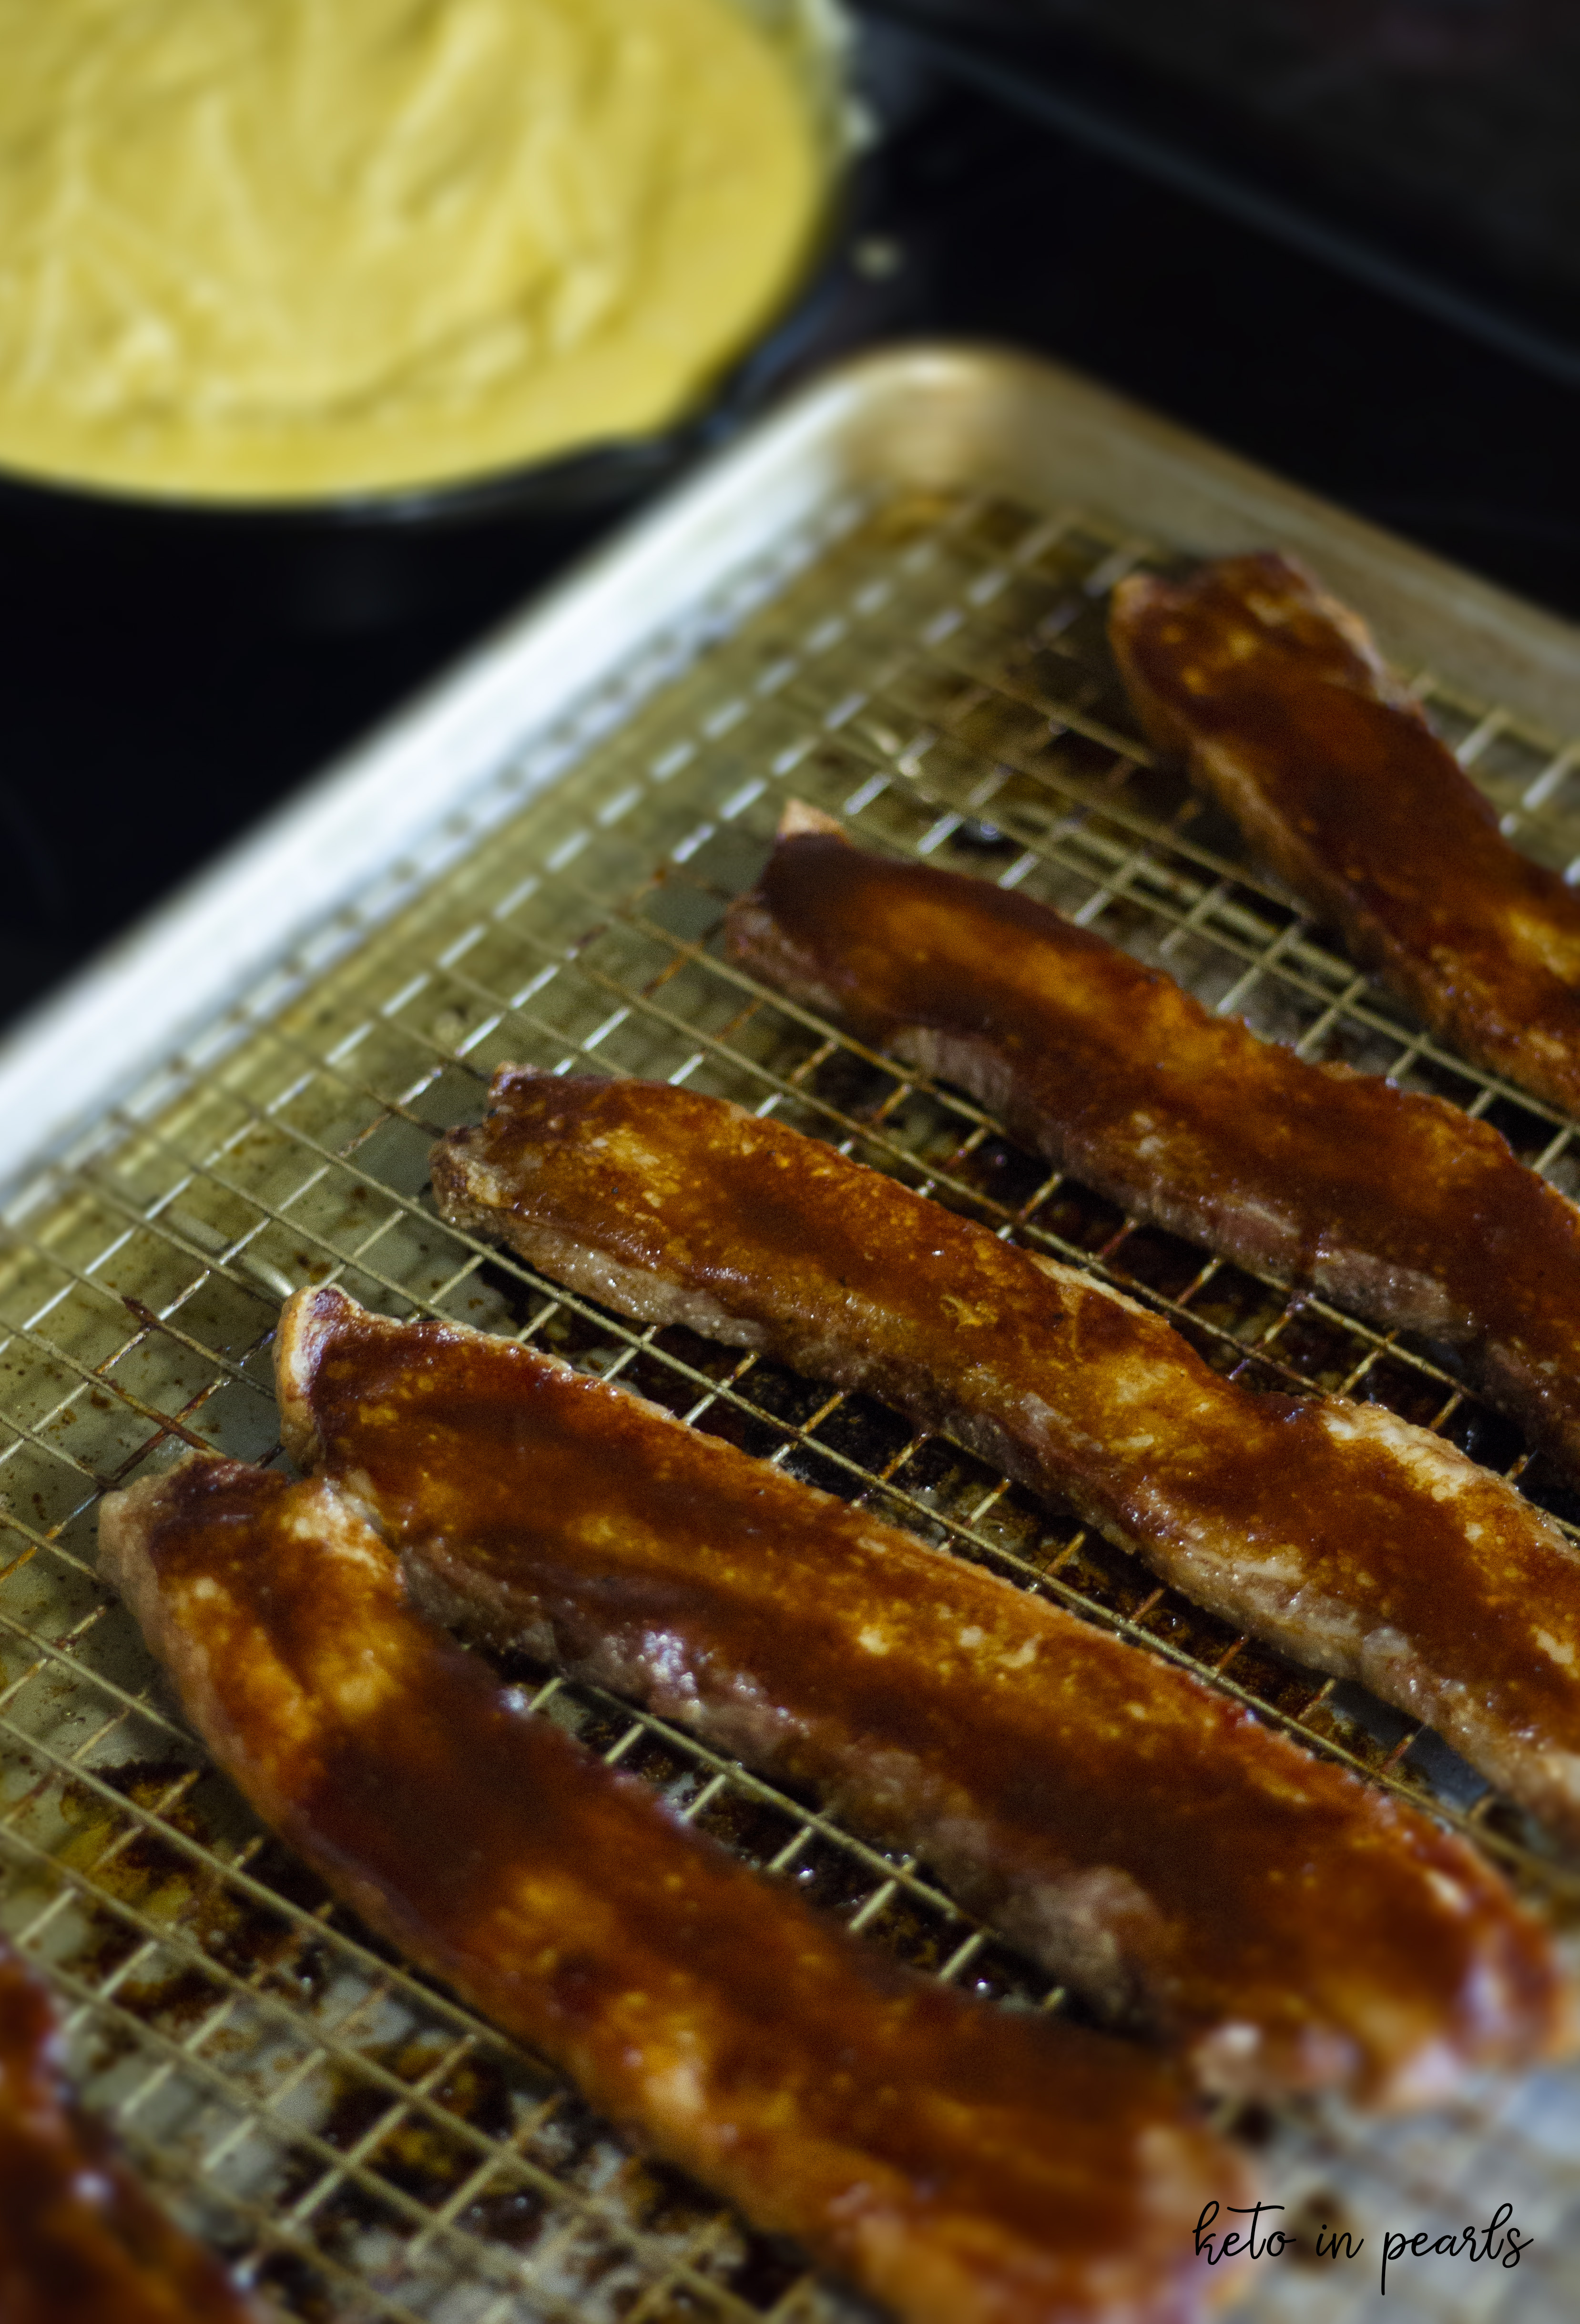 Thick pieces of BBQ pork belly are baked until crispy and slathered with a smokey hot BBQ sauce. Only 1 carb per bite!